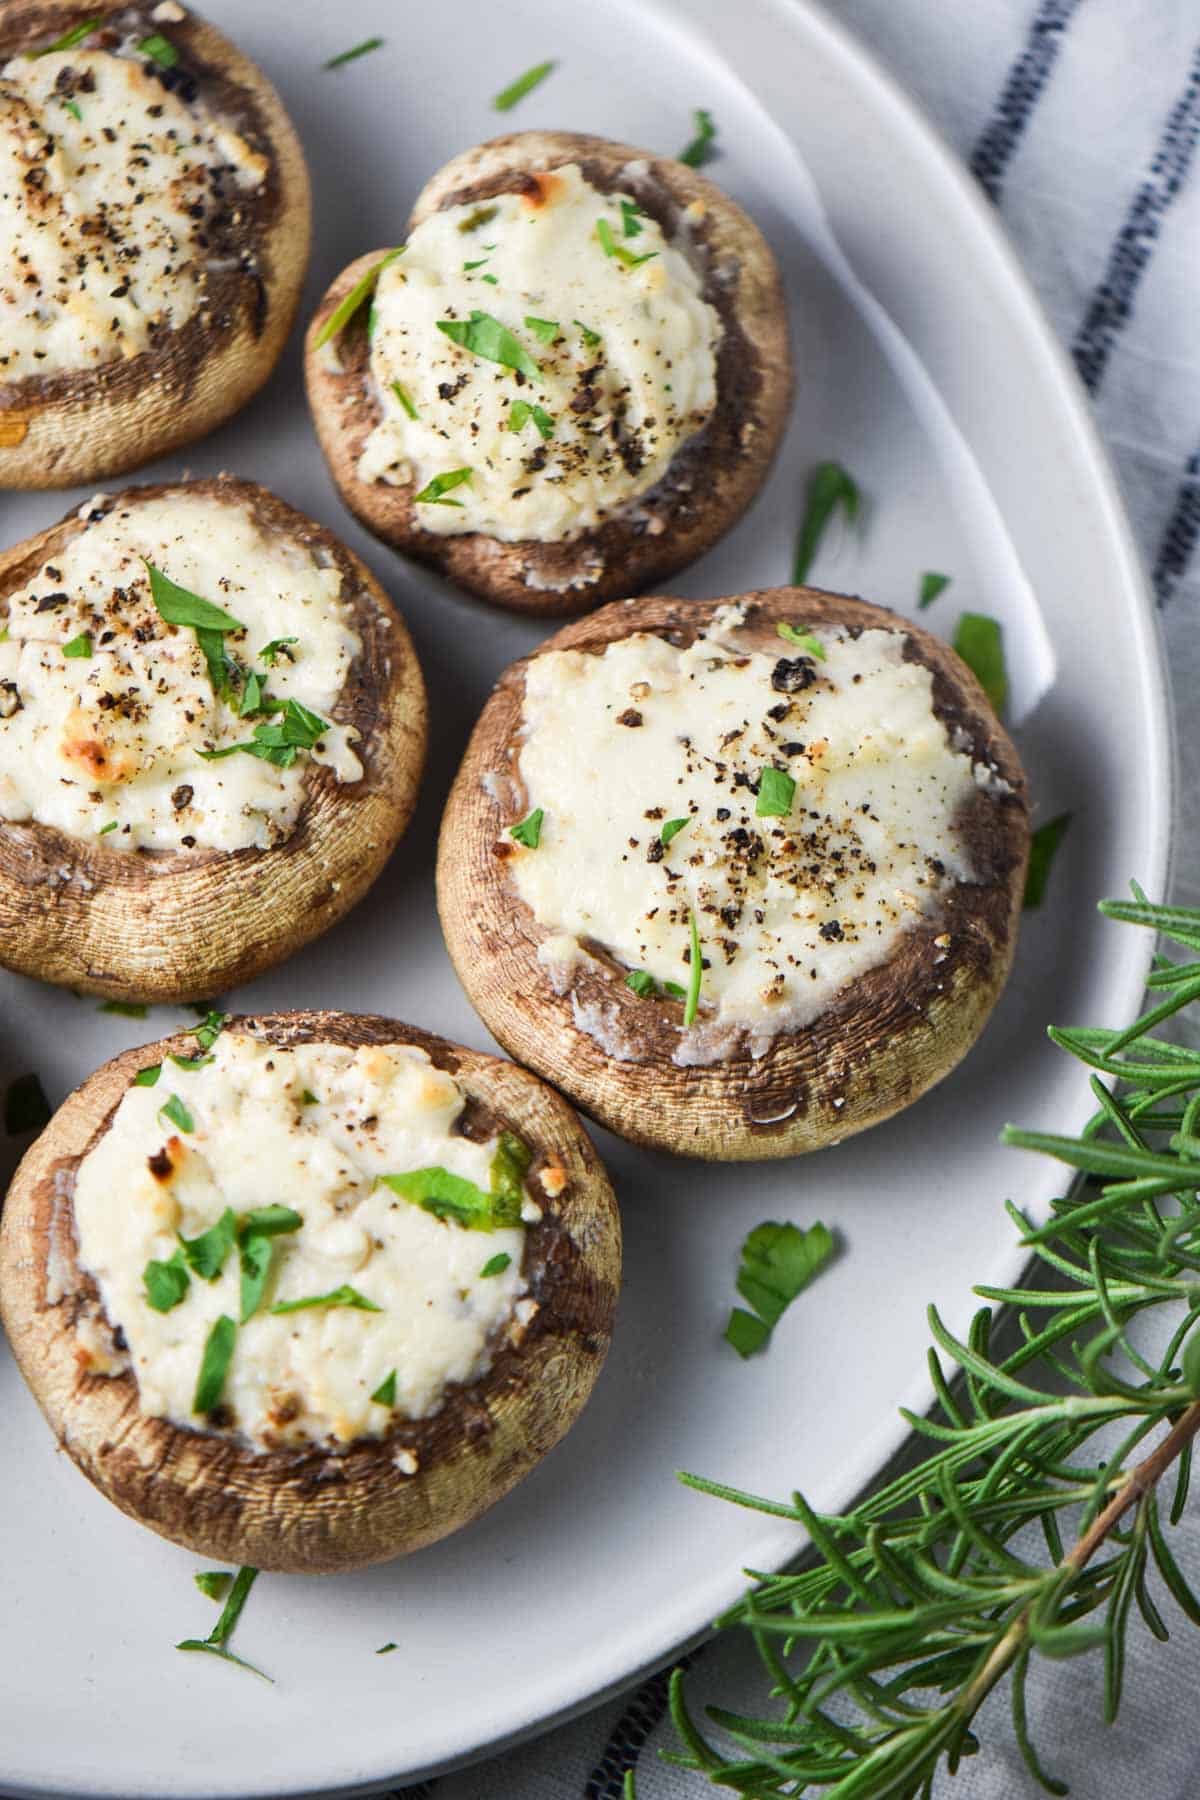 Baked stuffed mushrooms topped with pepper and parsley next to rosemary leaves on a plate.